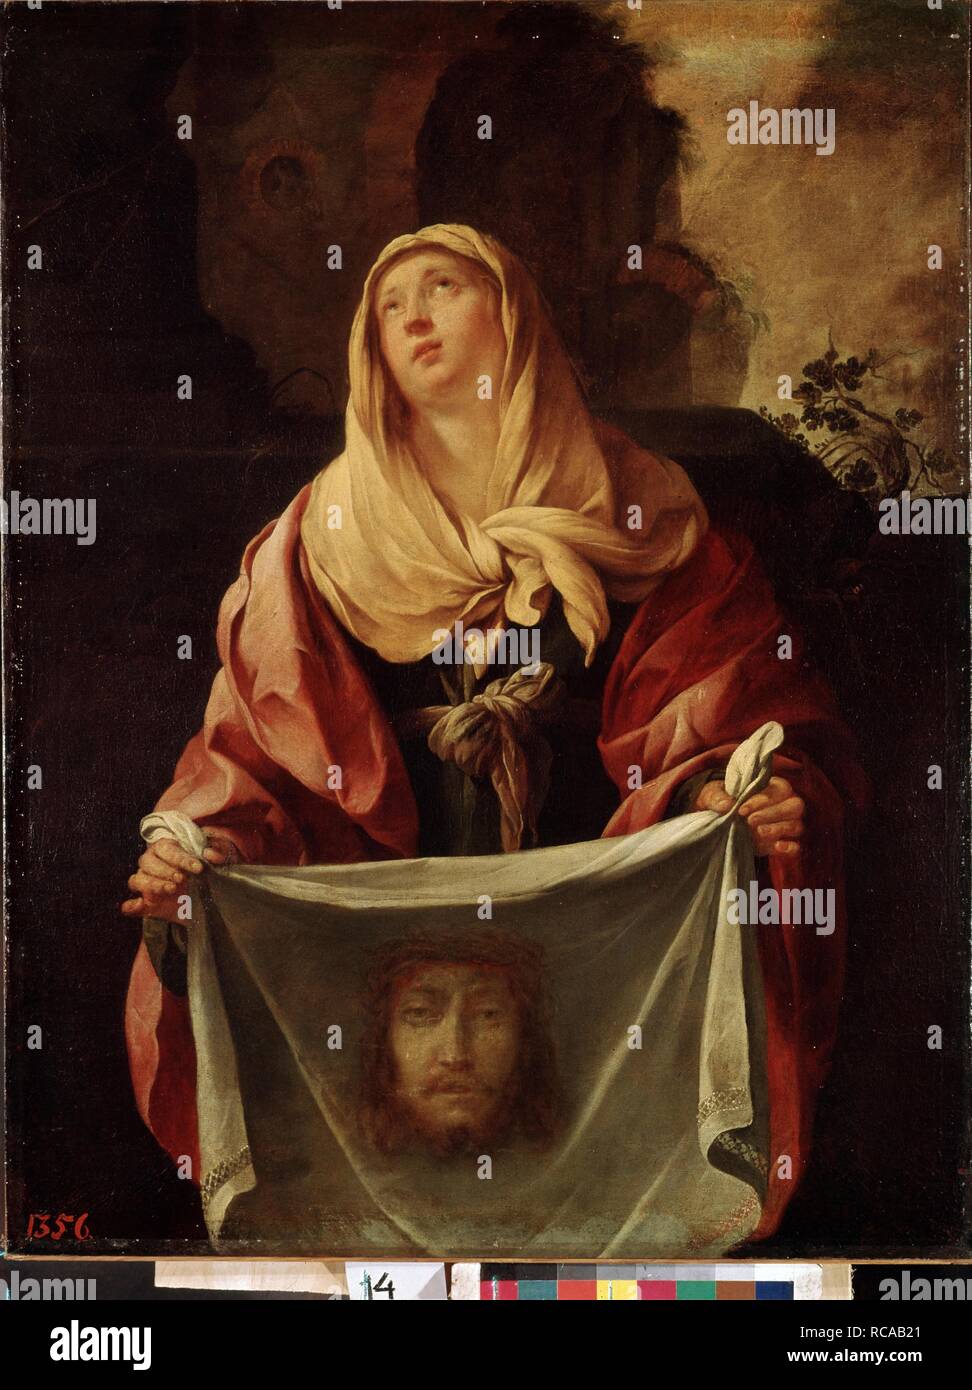 Saint Veronica. Museum: State Hermitage, St. Petersburg. Author: BLANCHARD, JACQUES. Stock Photo